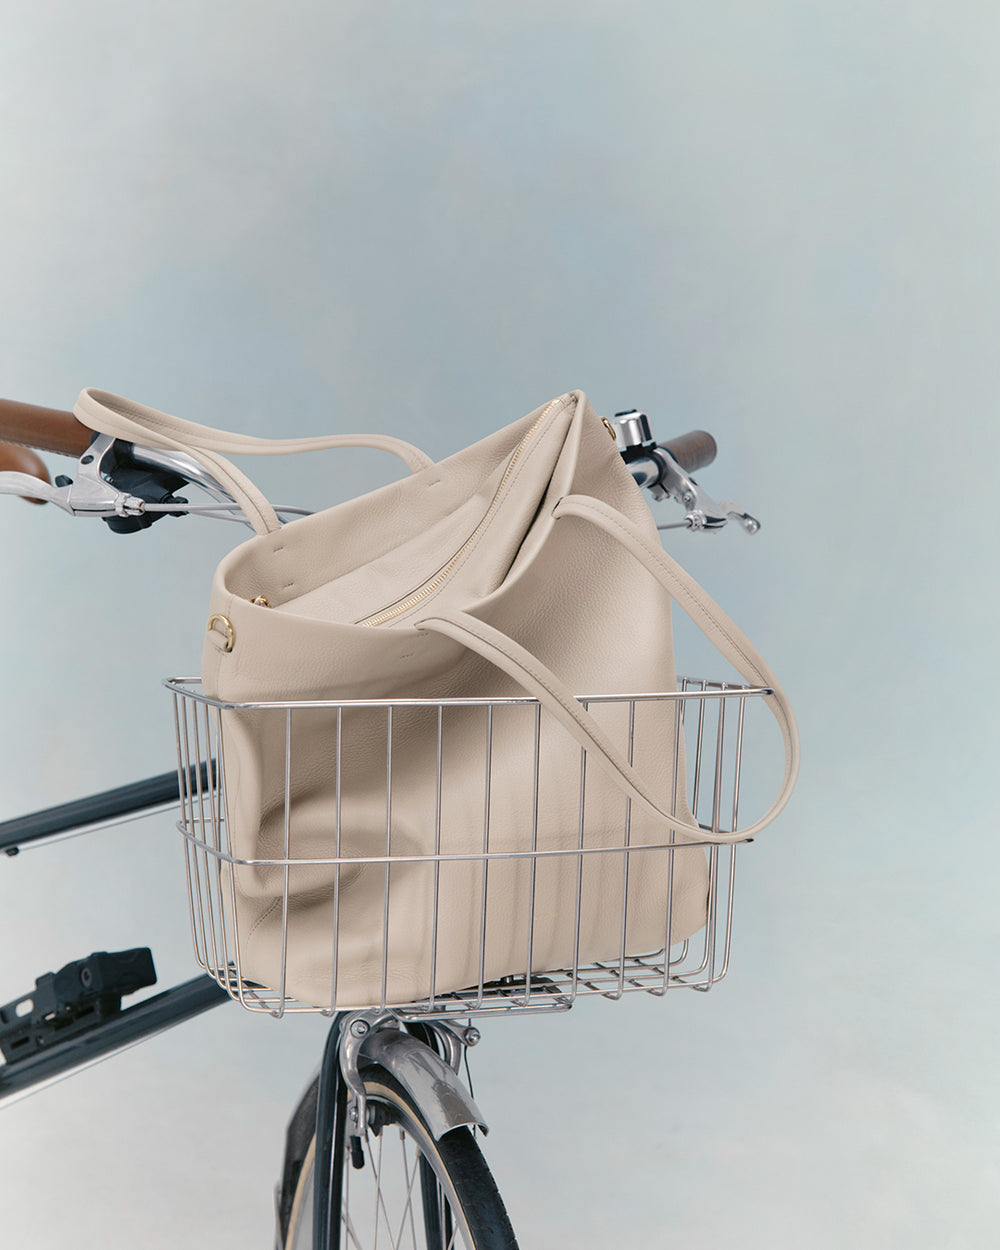 Bicycle with a bag in the front basket against a plain background.